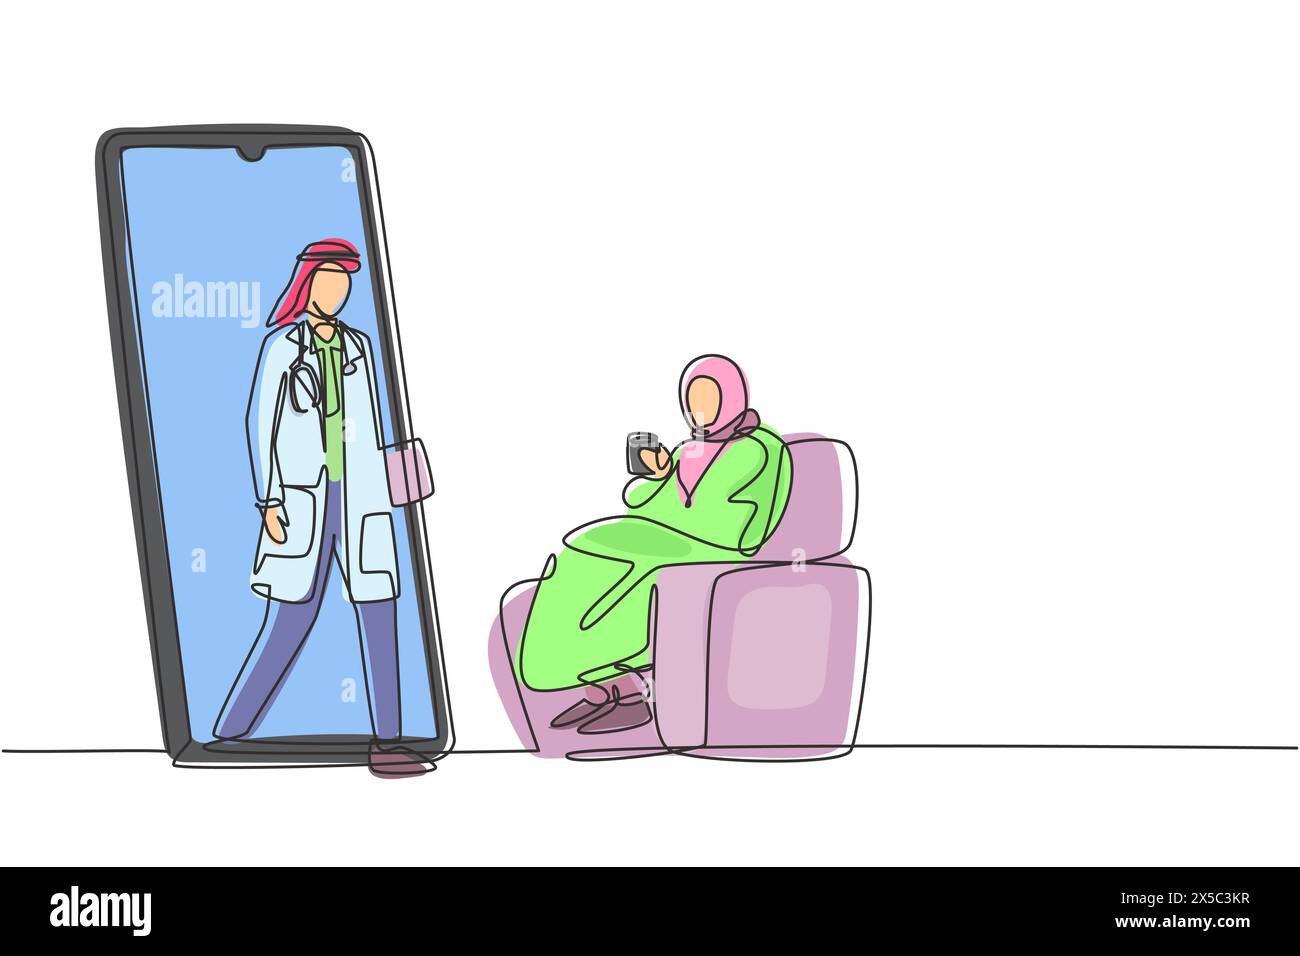 Single one line drawing hijab female patient sitting curled up on sofa, using blanket, holding mug and there is male doctor walking out of smartphone, Stock Vector